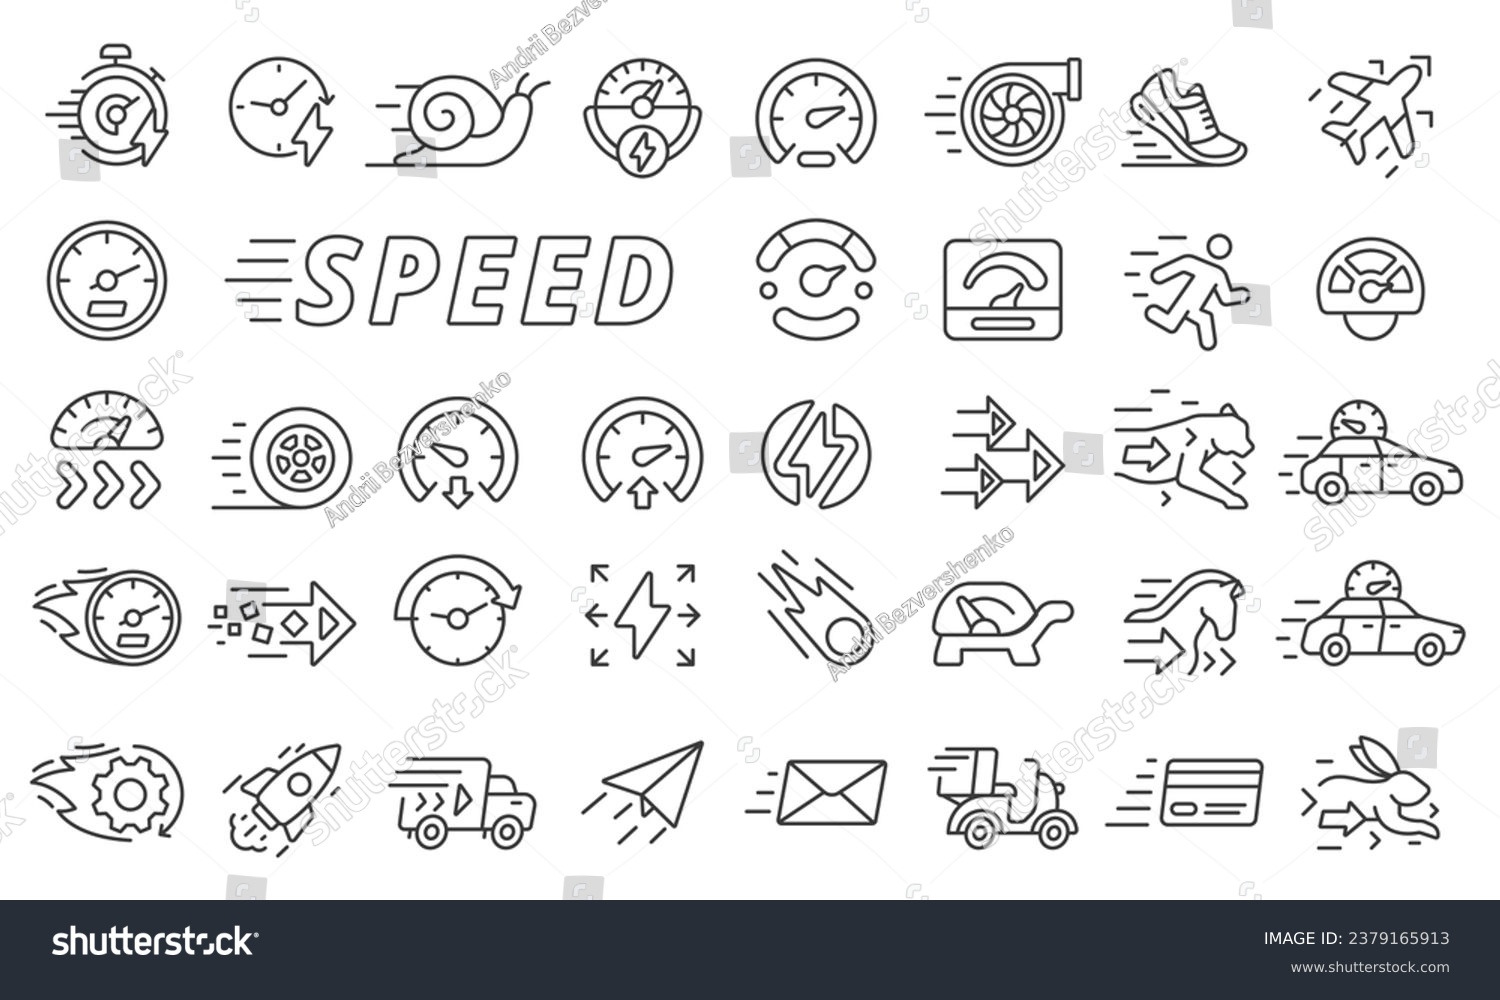 SVG of Speed icons set in line design. Fast, Speedometer, Rapid, Quick, Slow, Low speed, Run, Velocity, Turbo, Arrows, Quickness, High speed vector illustrations. Editable stroke icons. svg